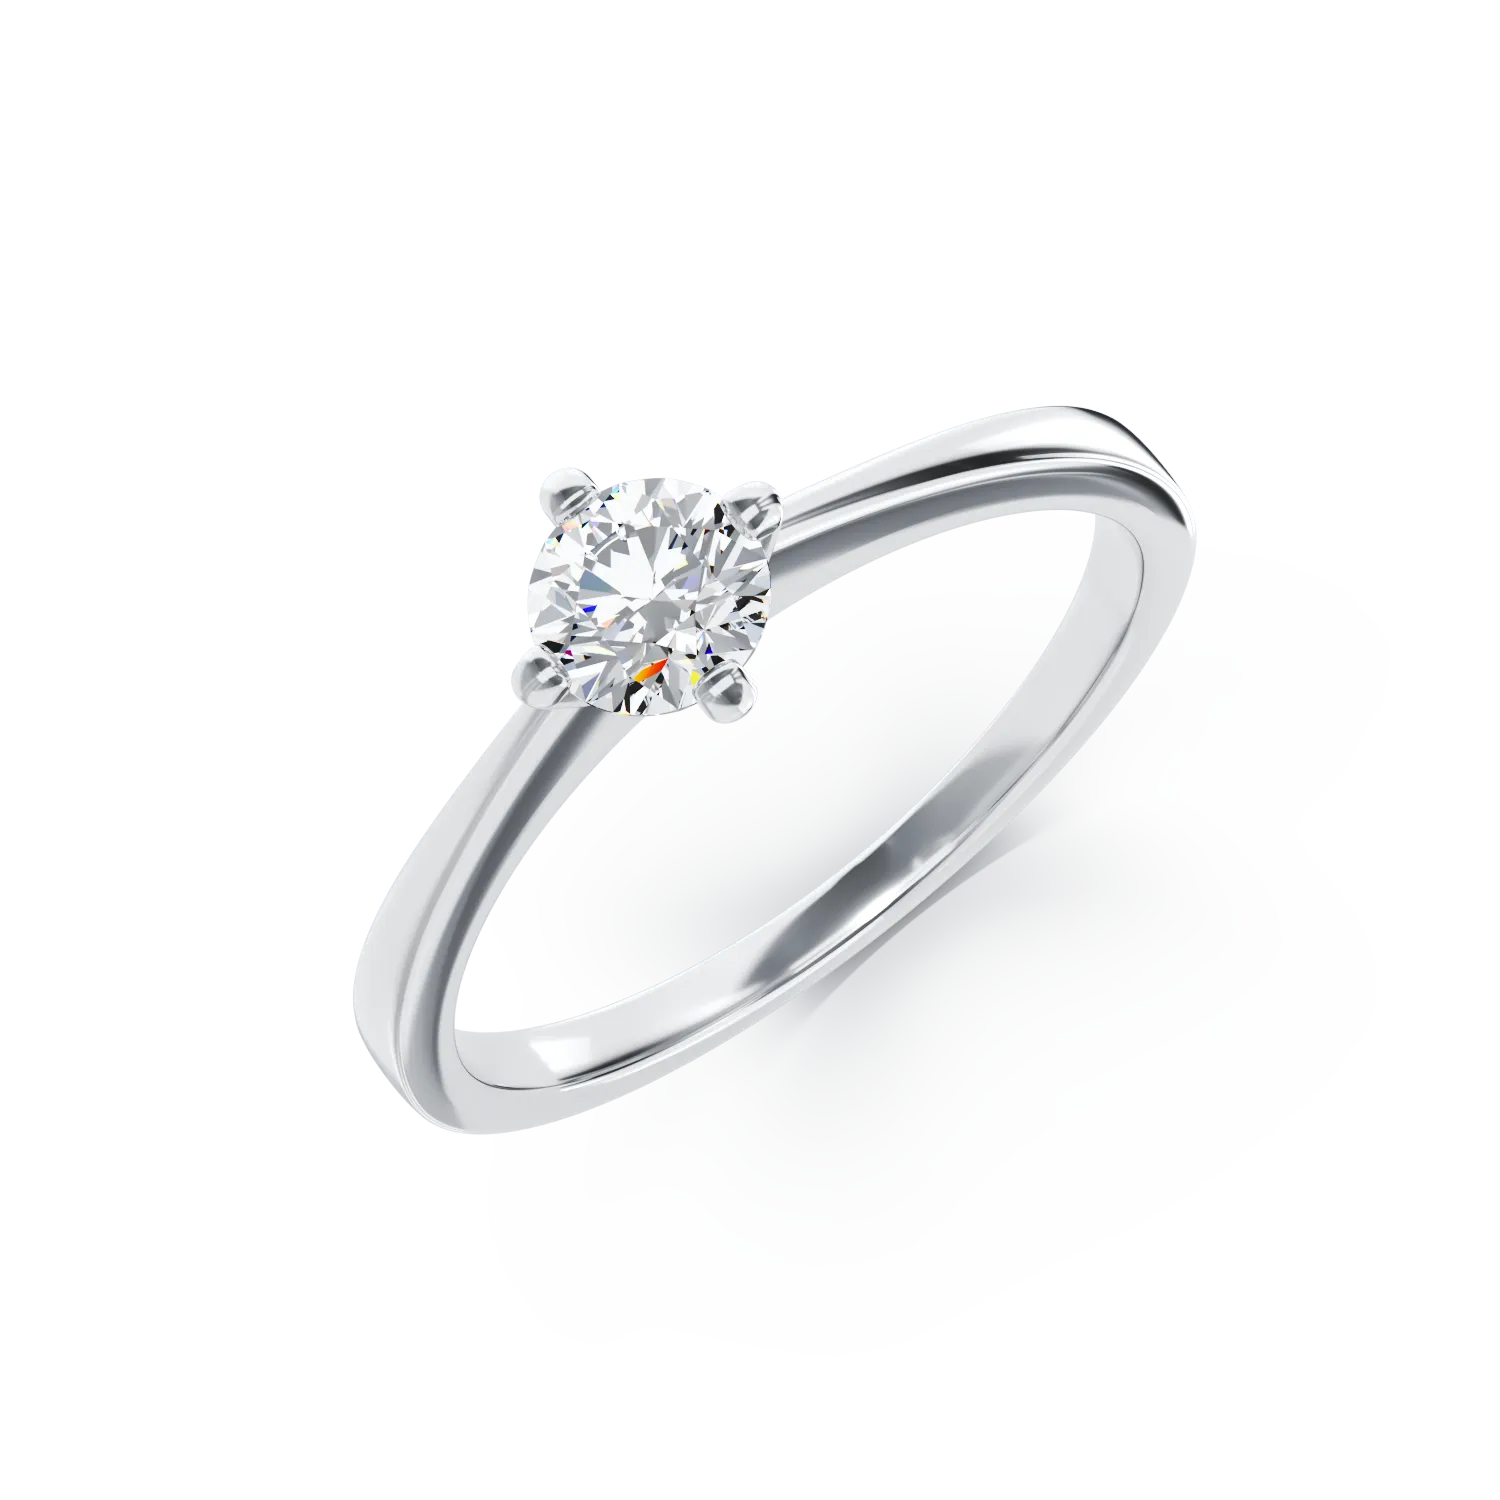 18K white gold engagement ring with a 0.41ct solitaire diamond